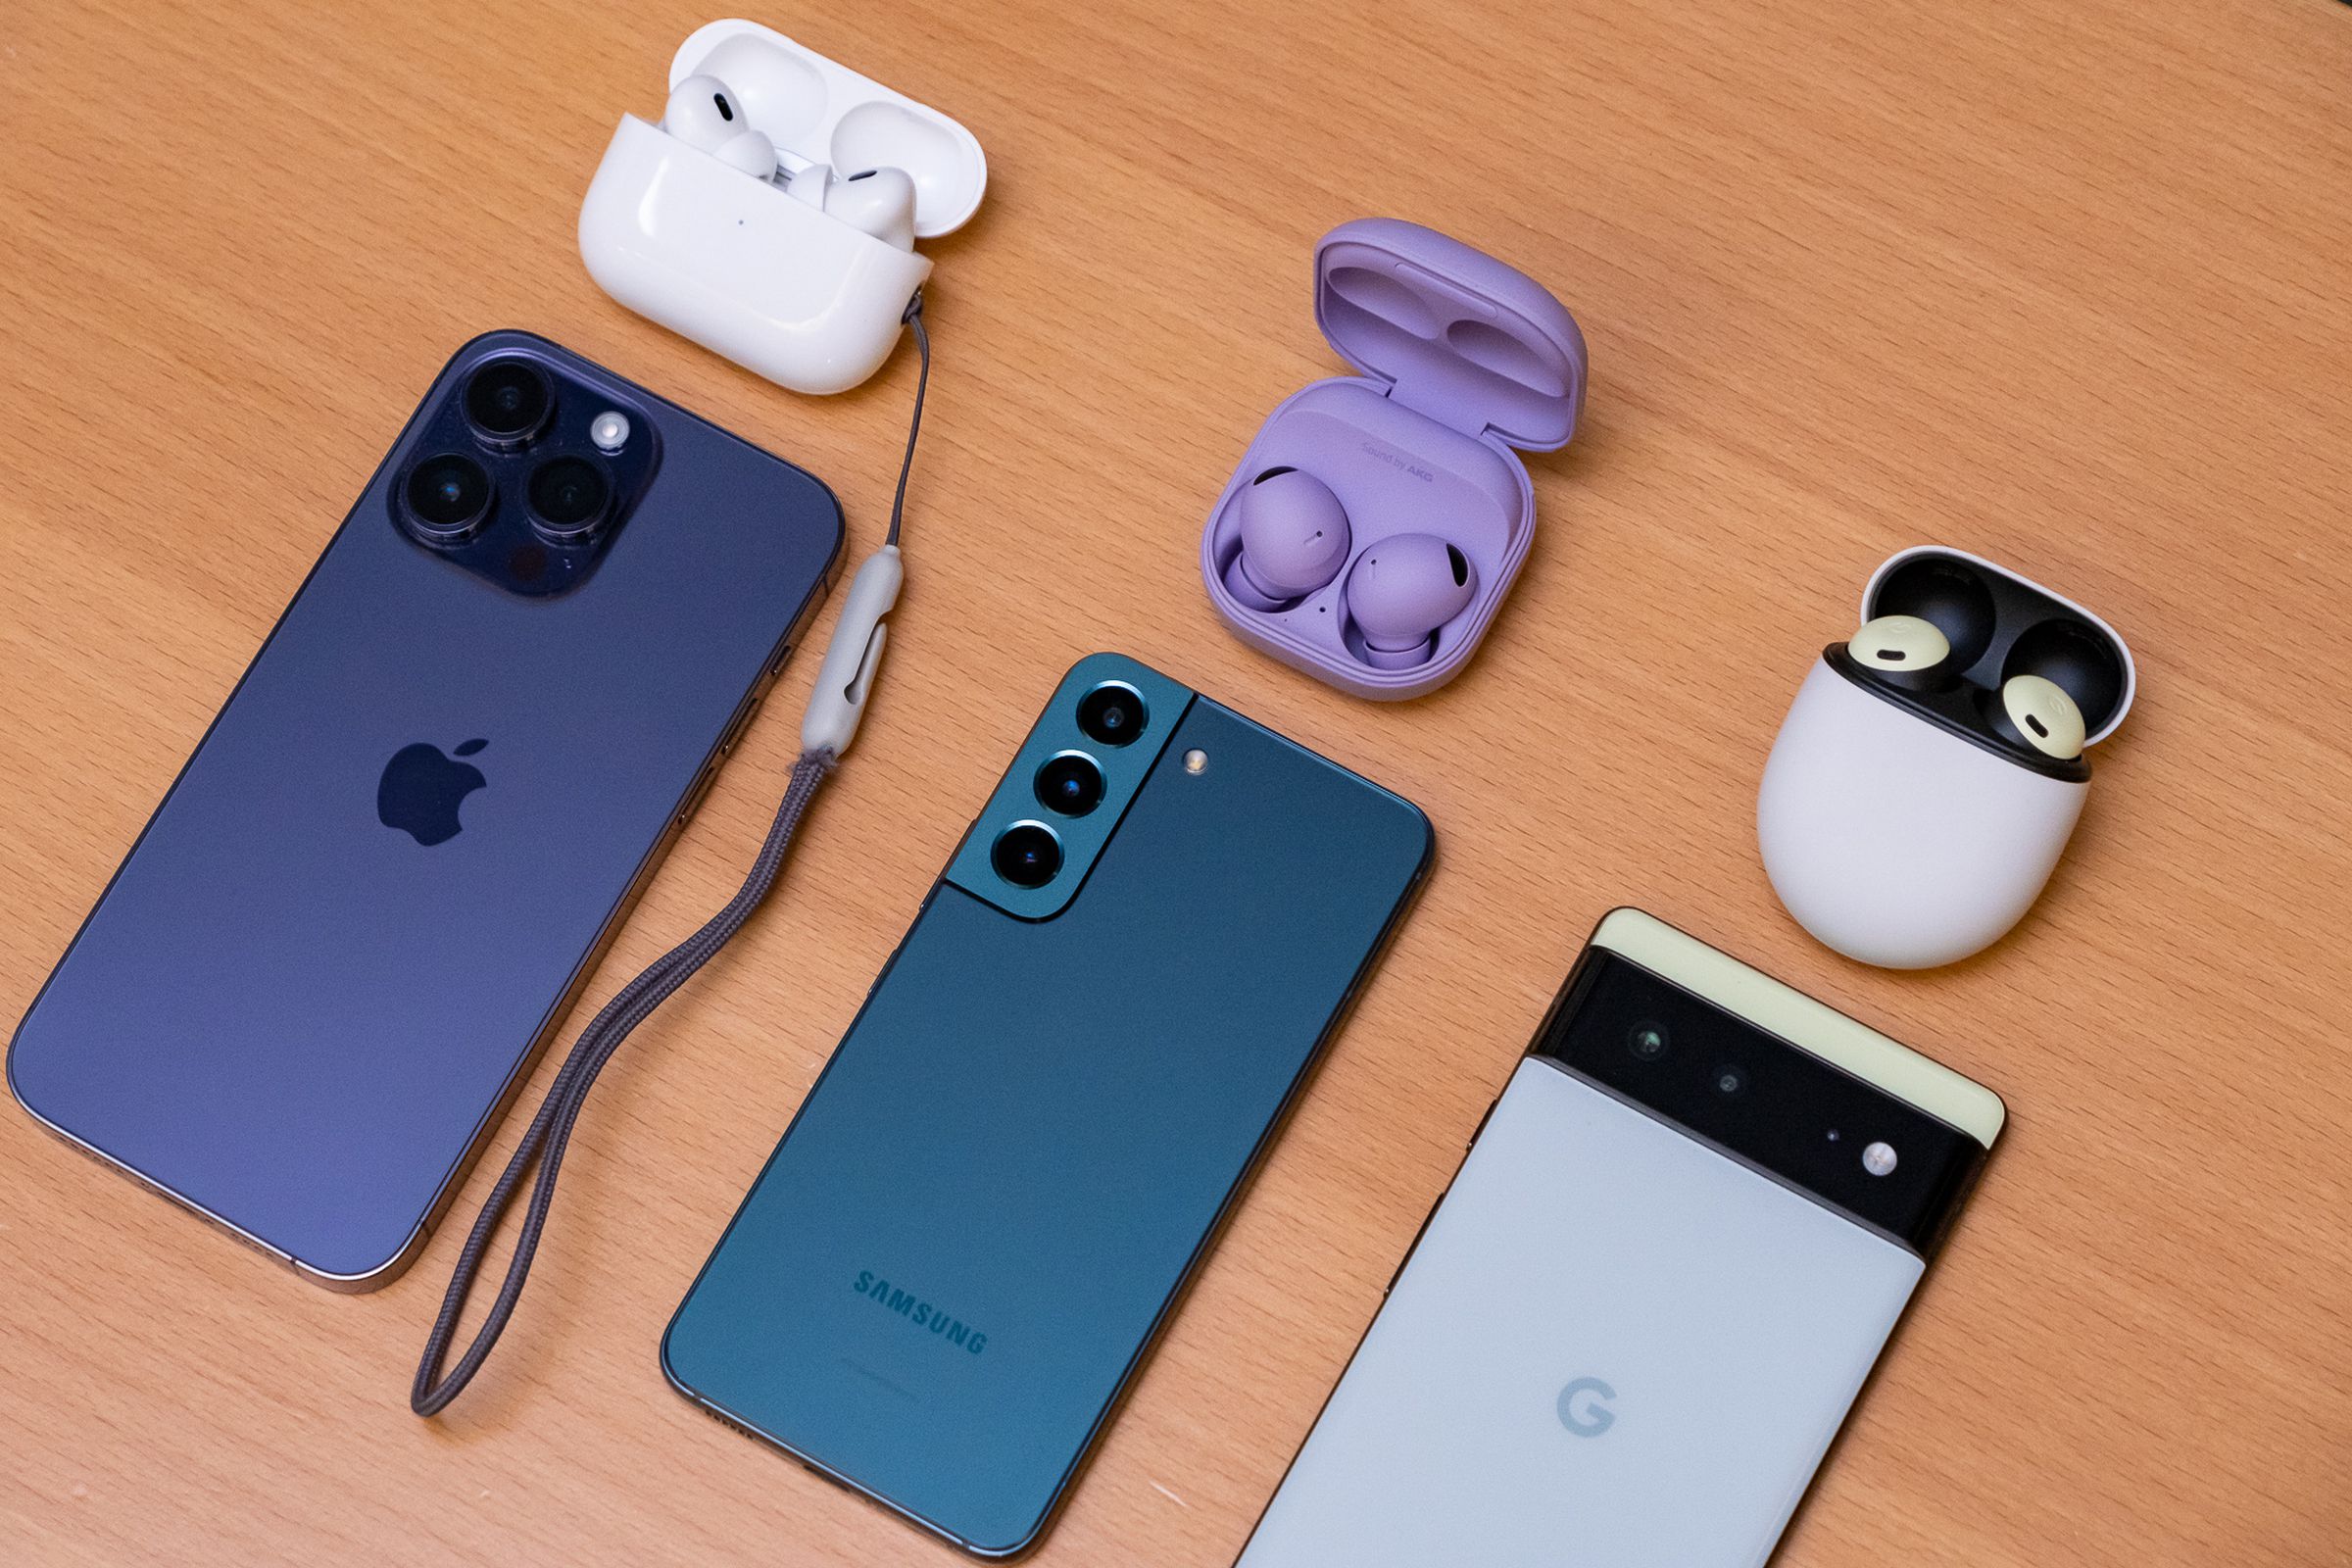 Apple’s second-generation AirPods Pro, Samsung’s Galaxy Buds 2 Pro, and Google’s Pixel Buds Pro pictured above the iPhone 14 Pro Max, Galaxy S22, and Pixel 6, respectively.